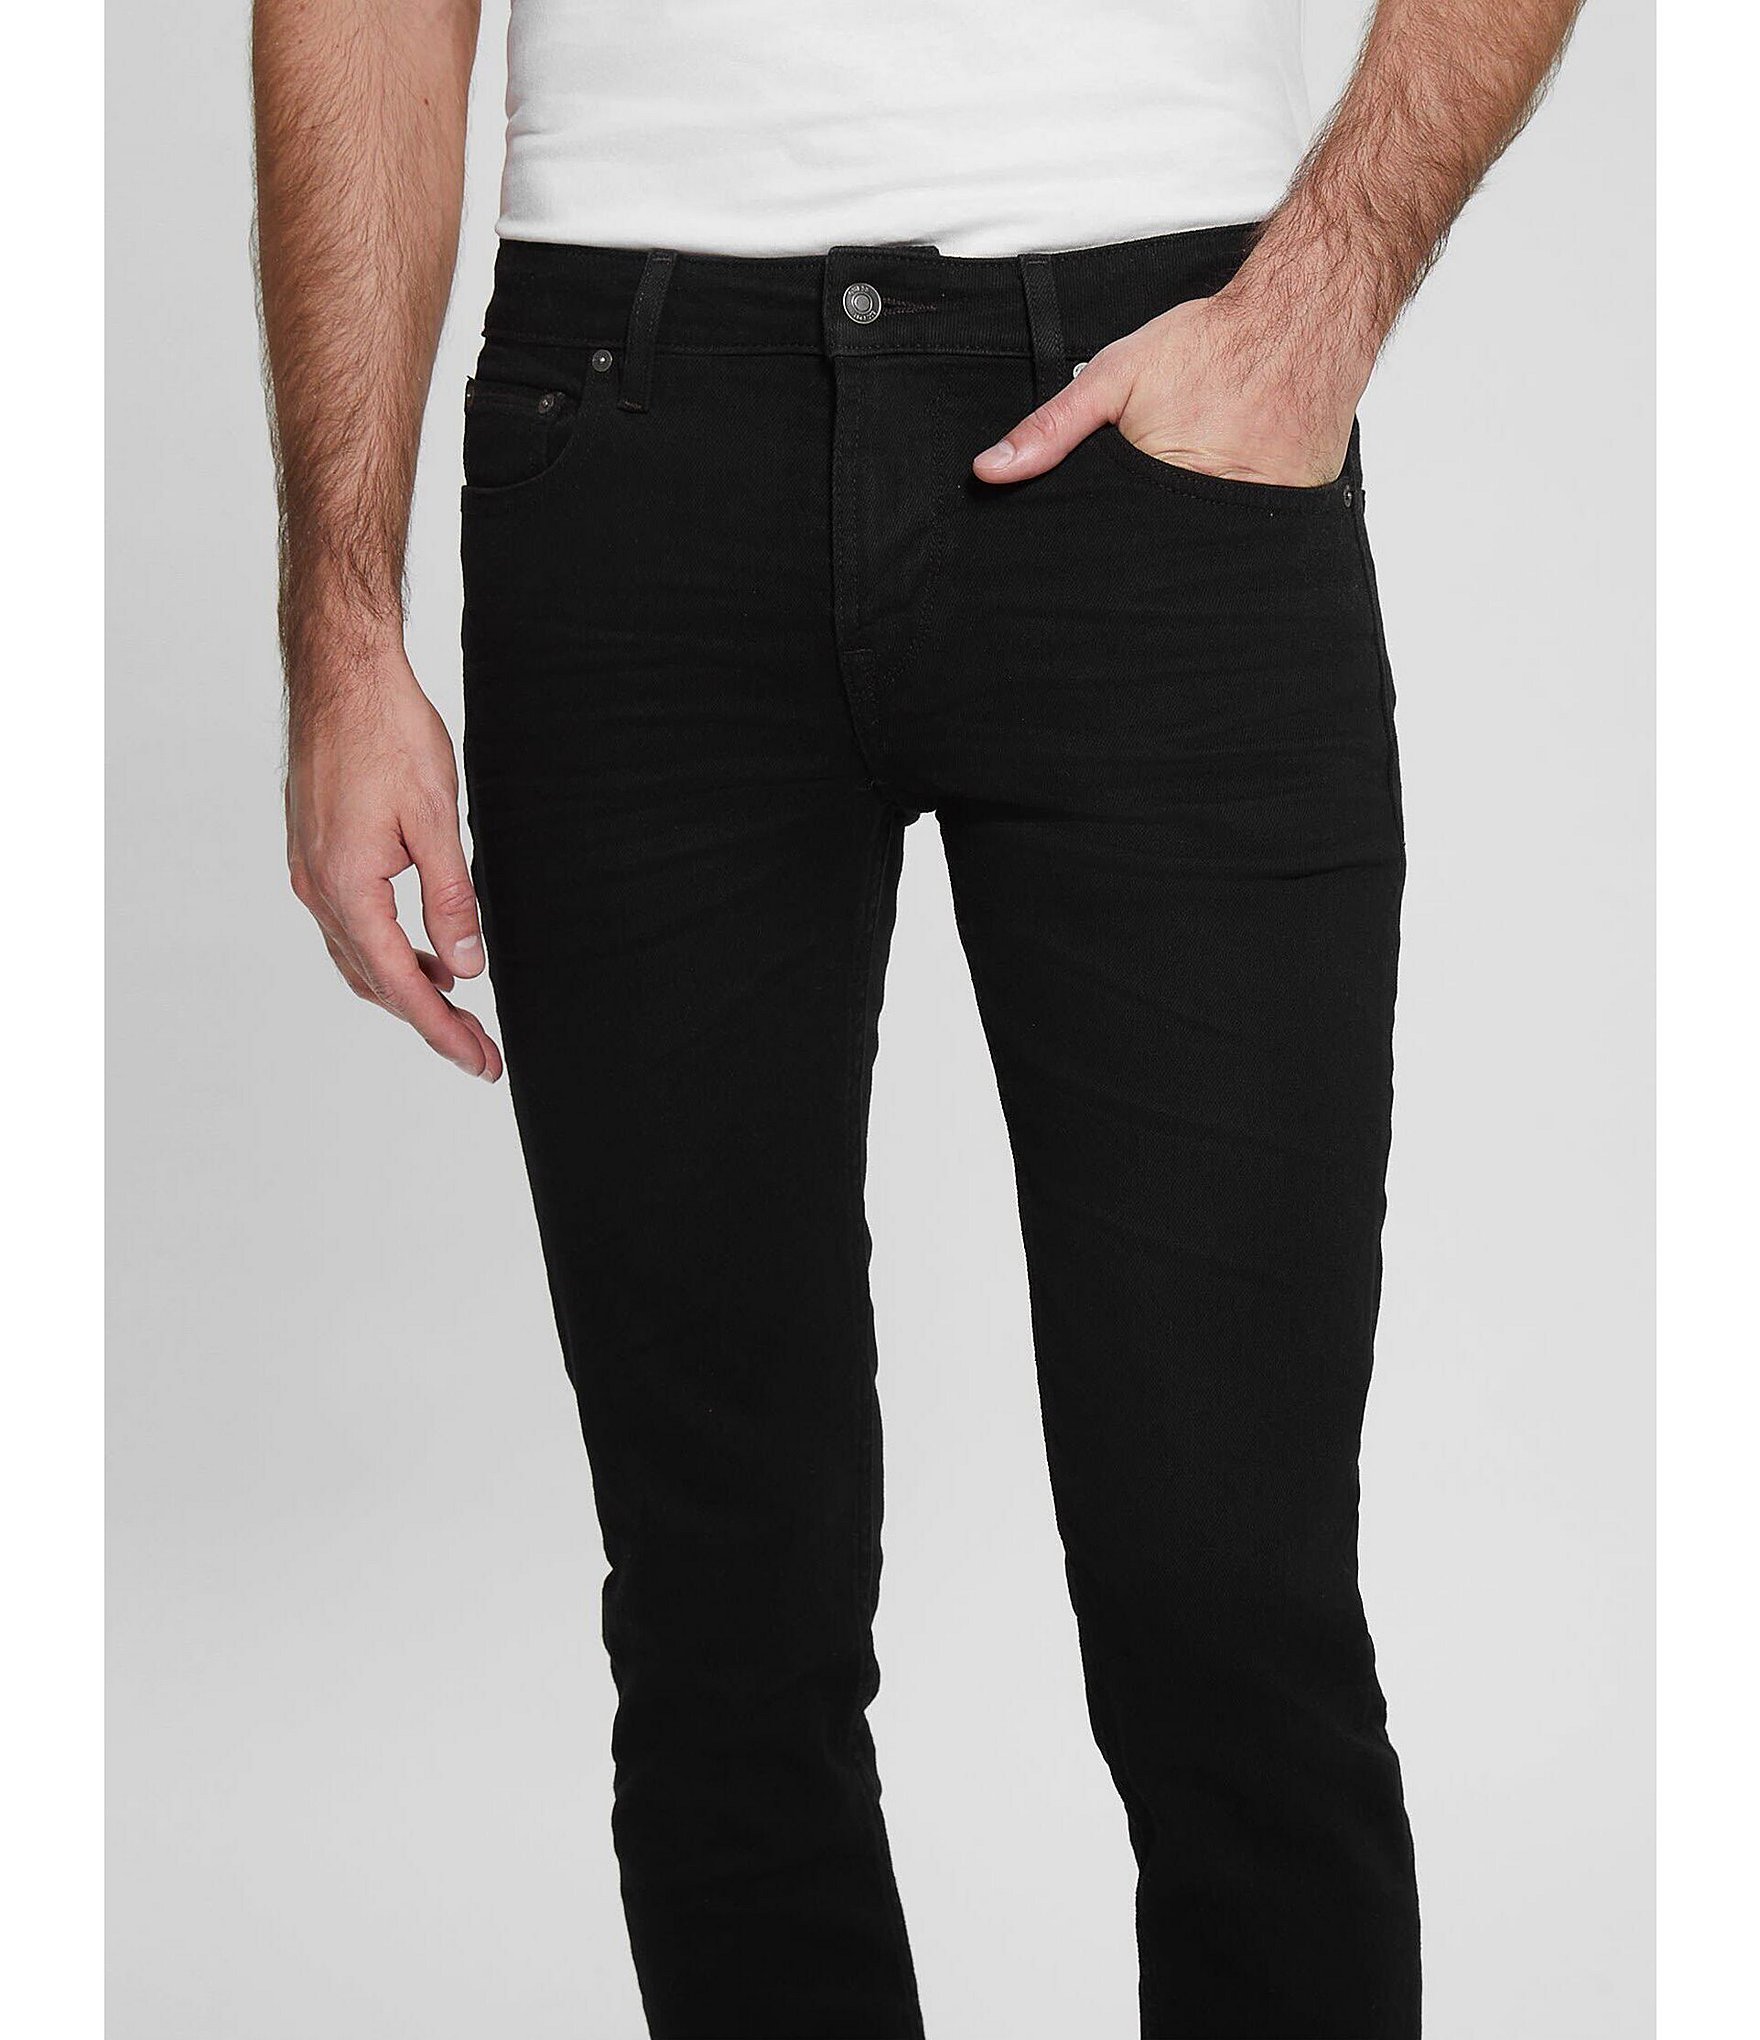 BDG Urban Outfitters Recycled Dad Jeans